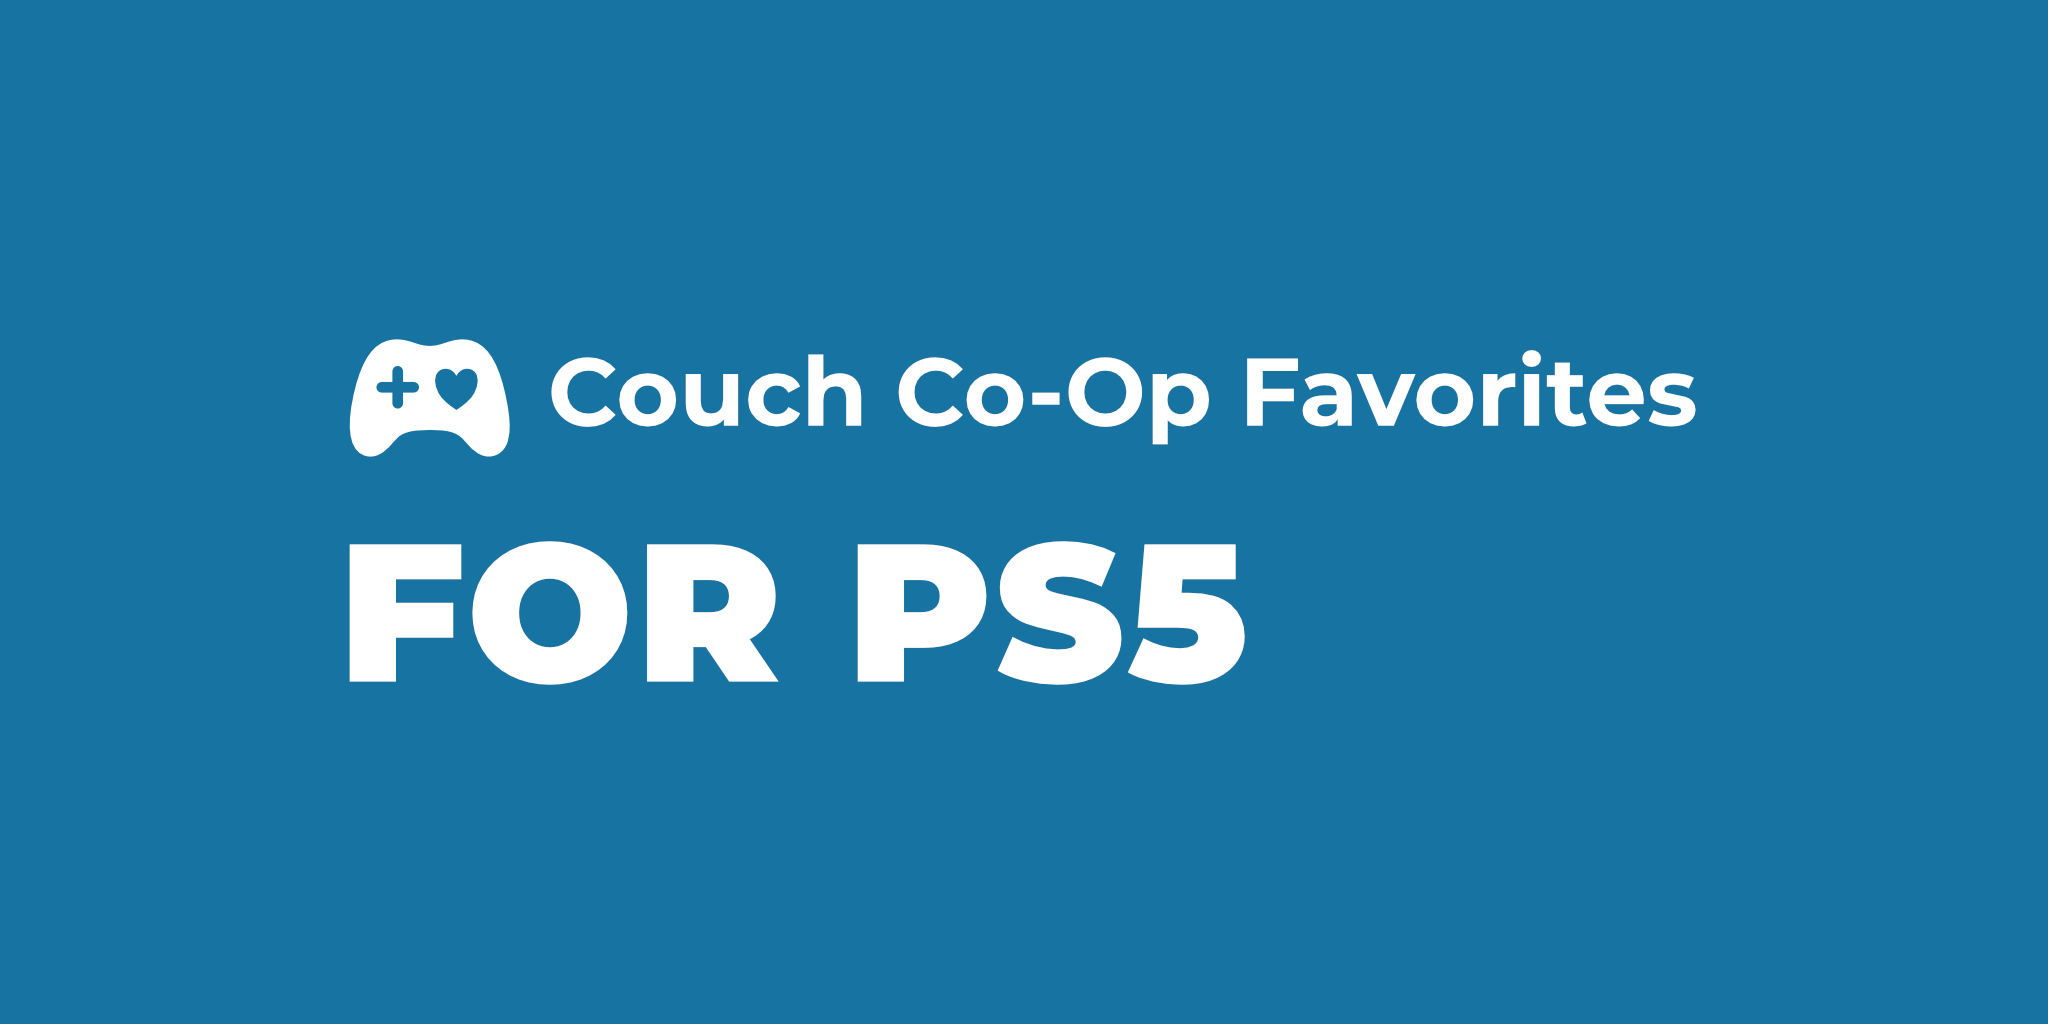 Best Couch Co Op Games For Ps5 In 22 Handpicked And Regularly Updated Couch Co Op Favorites